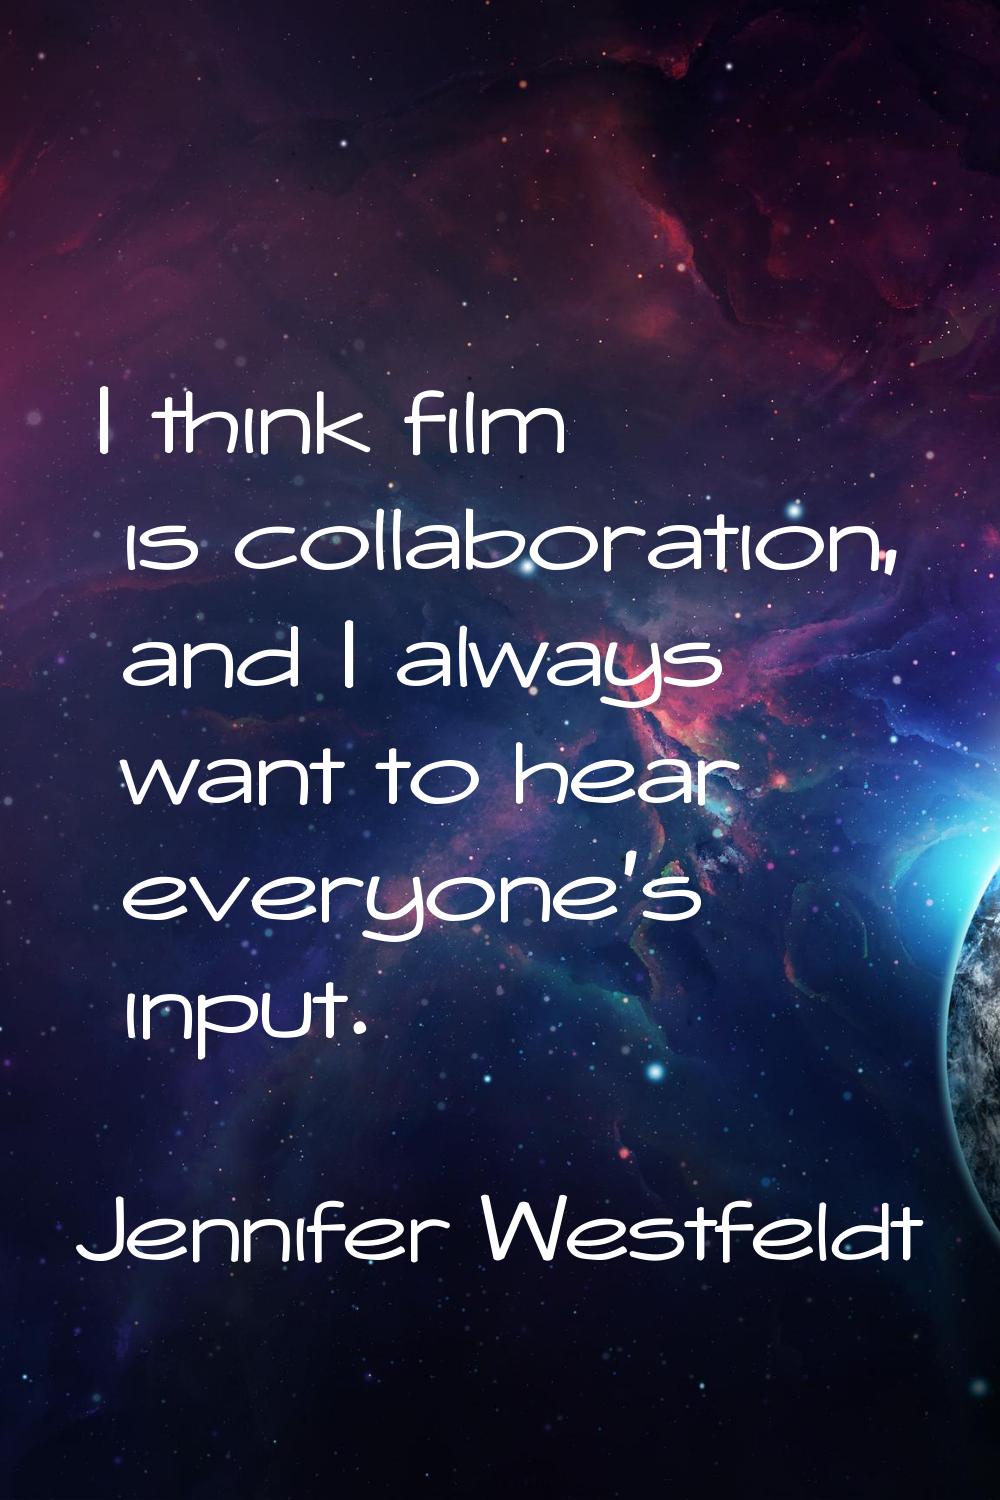 I think film is collaboration, and I always want to hear everyone's input.